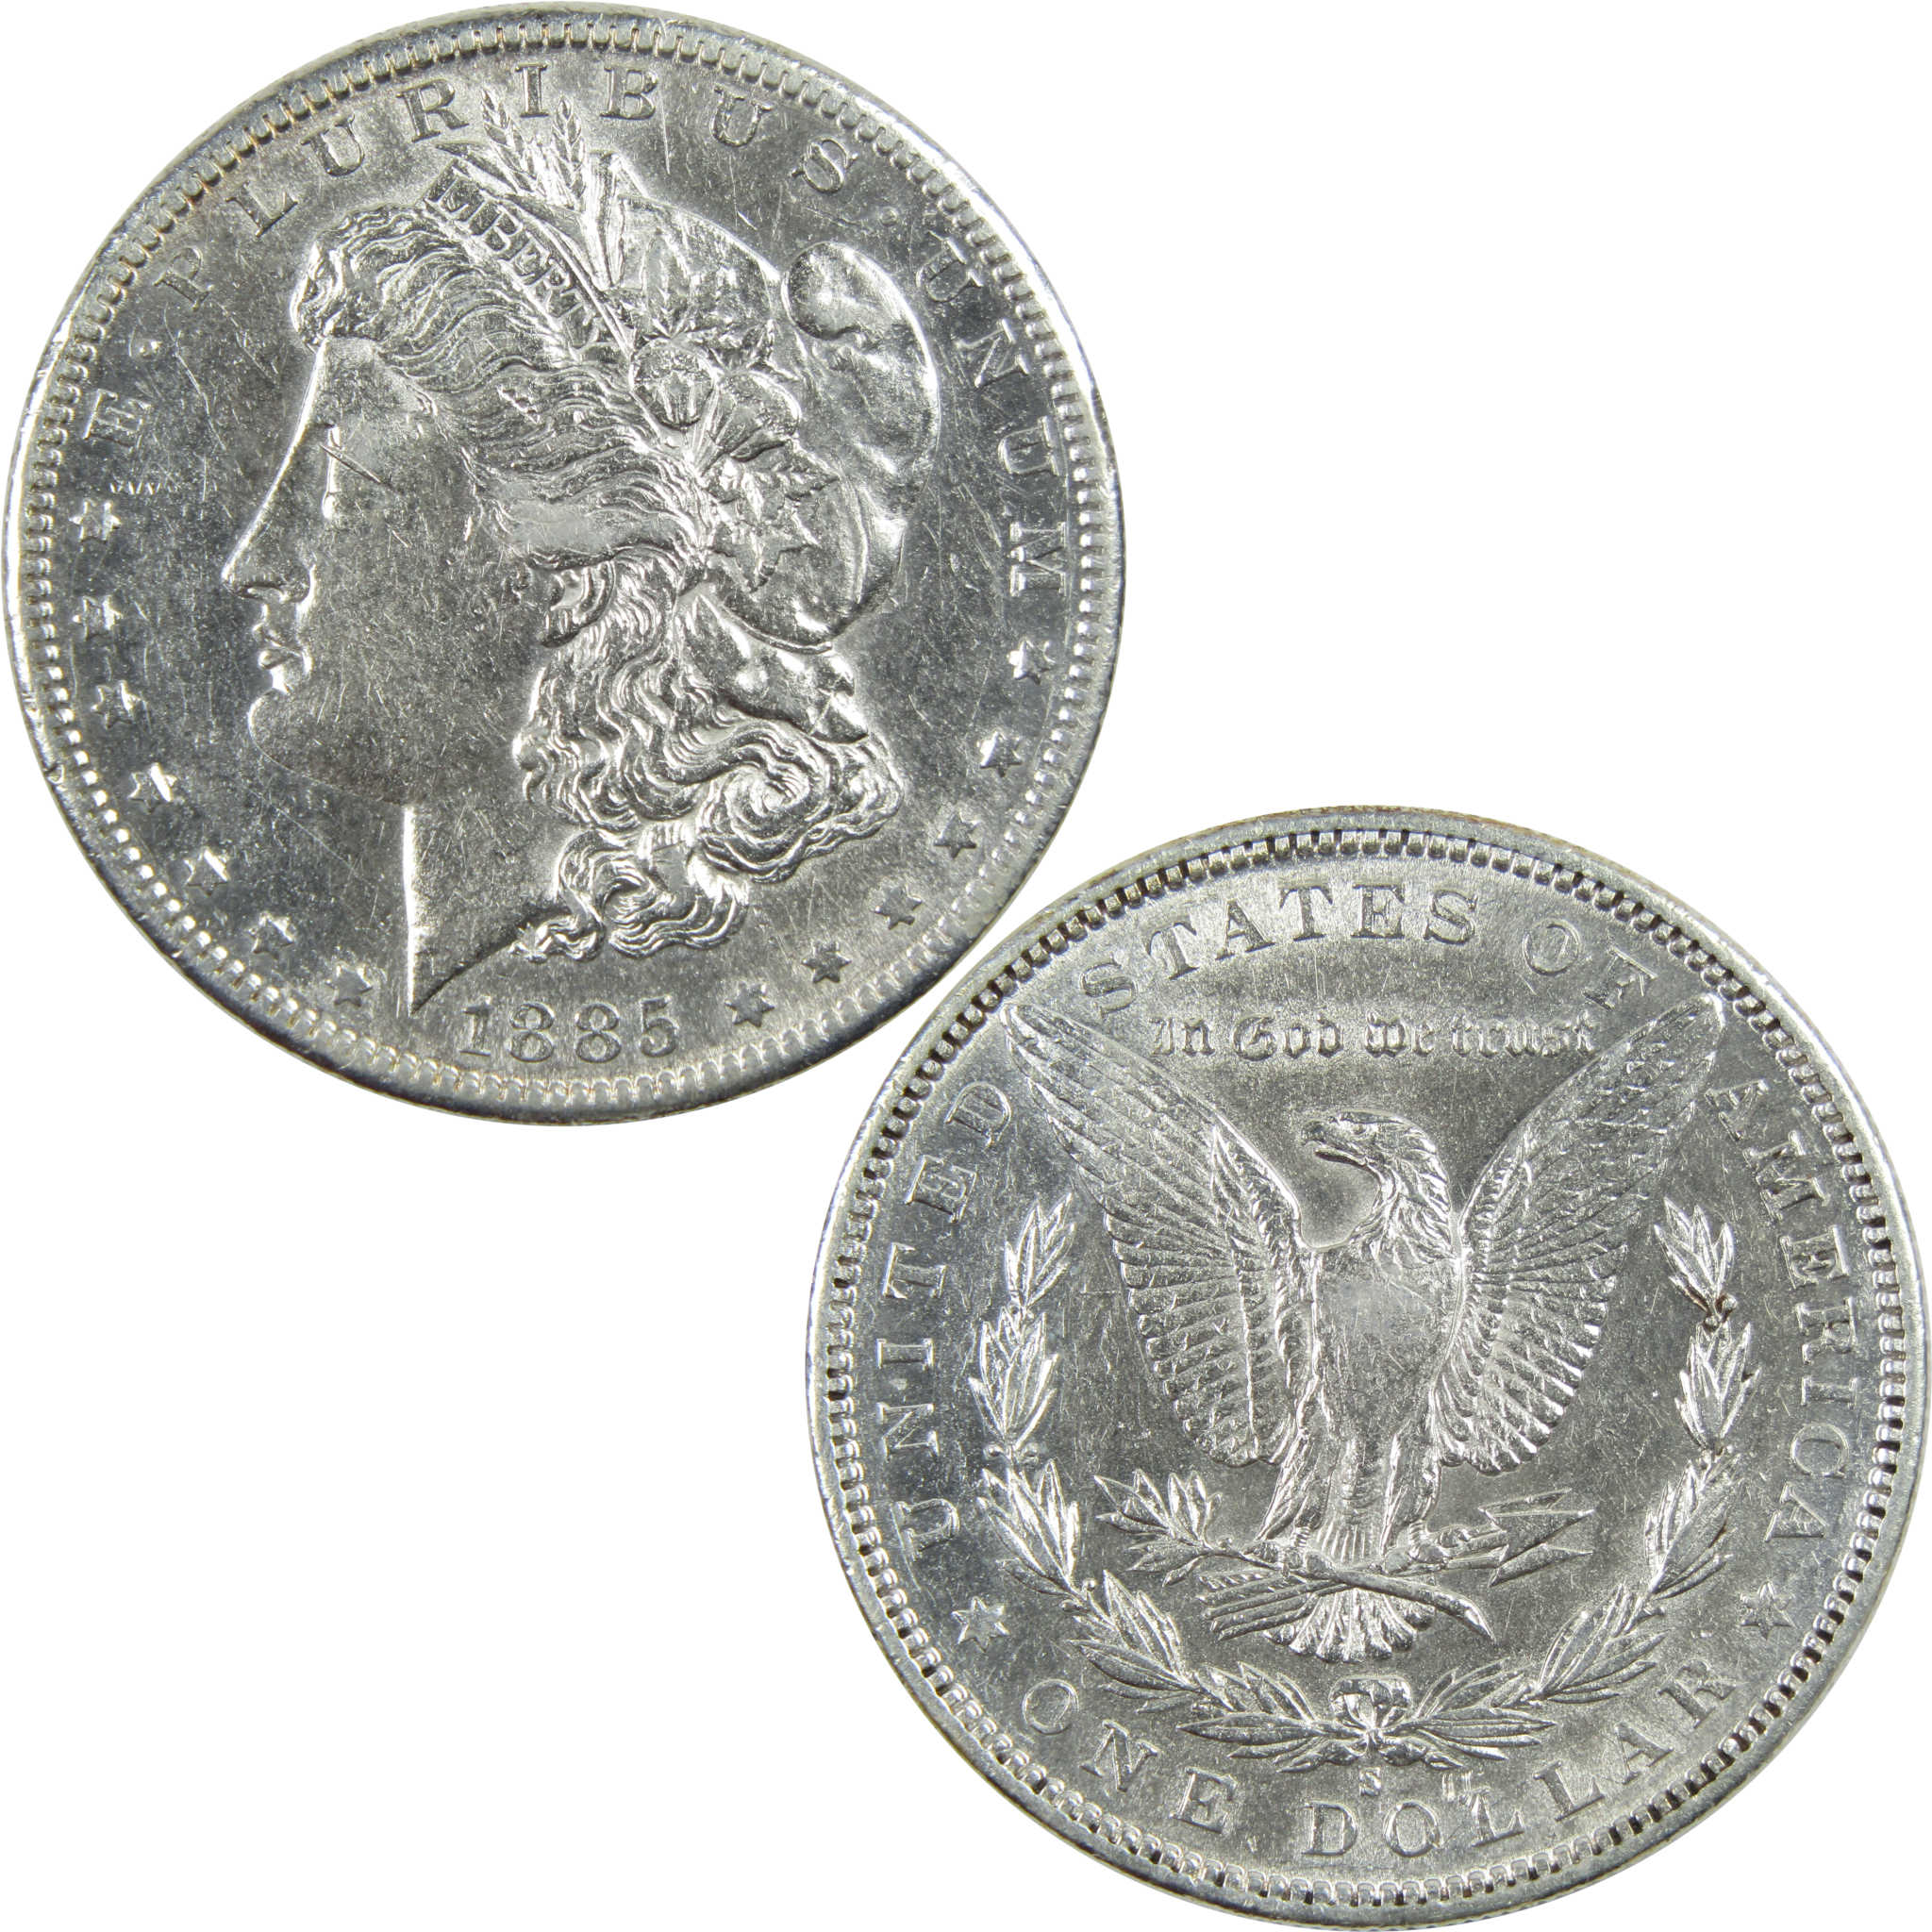 1885 S Morgan Dollar AU About Uncirculated Details Silver SKU:I11697 - Morgan coin - Morgan silver dollar - Morgan silver dollar for sale - Profile Coins &amp; Collectibles